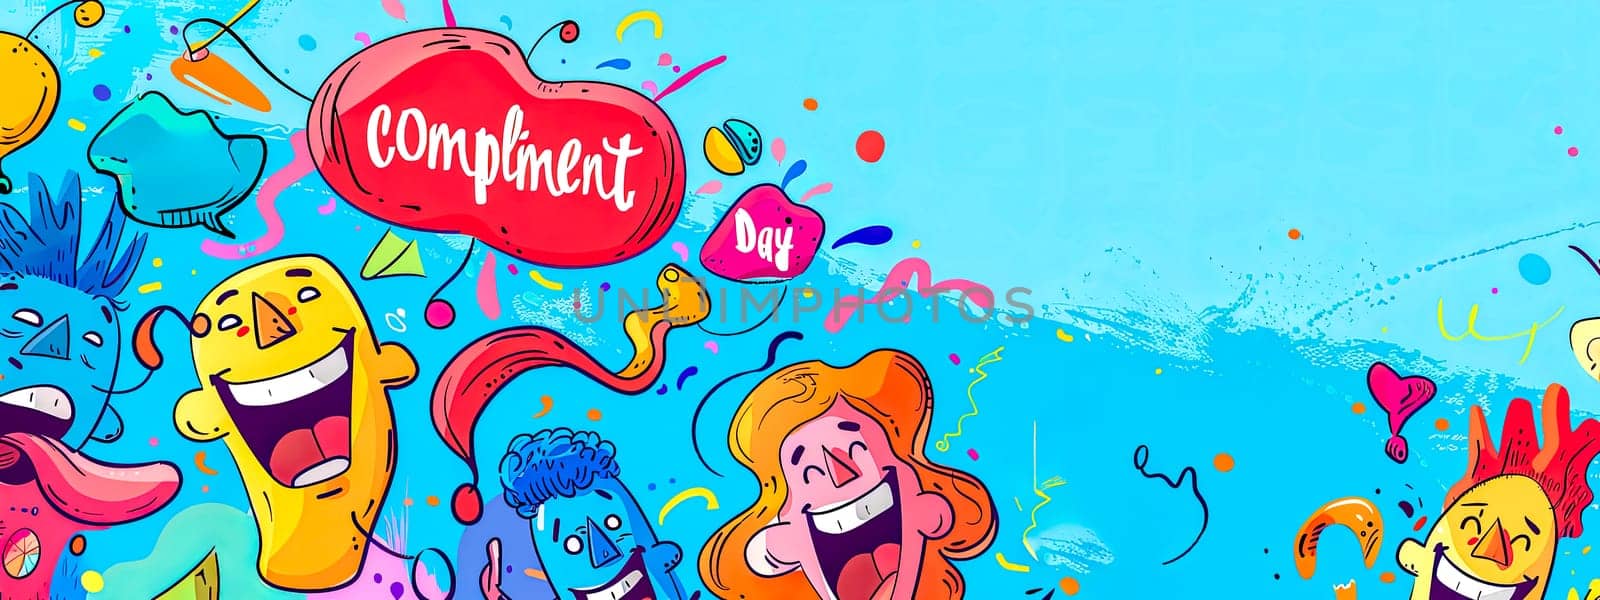 Vibrant illustration for compliment day with joyful characters and festive decorations